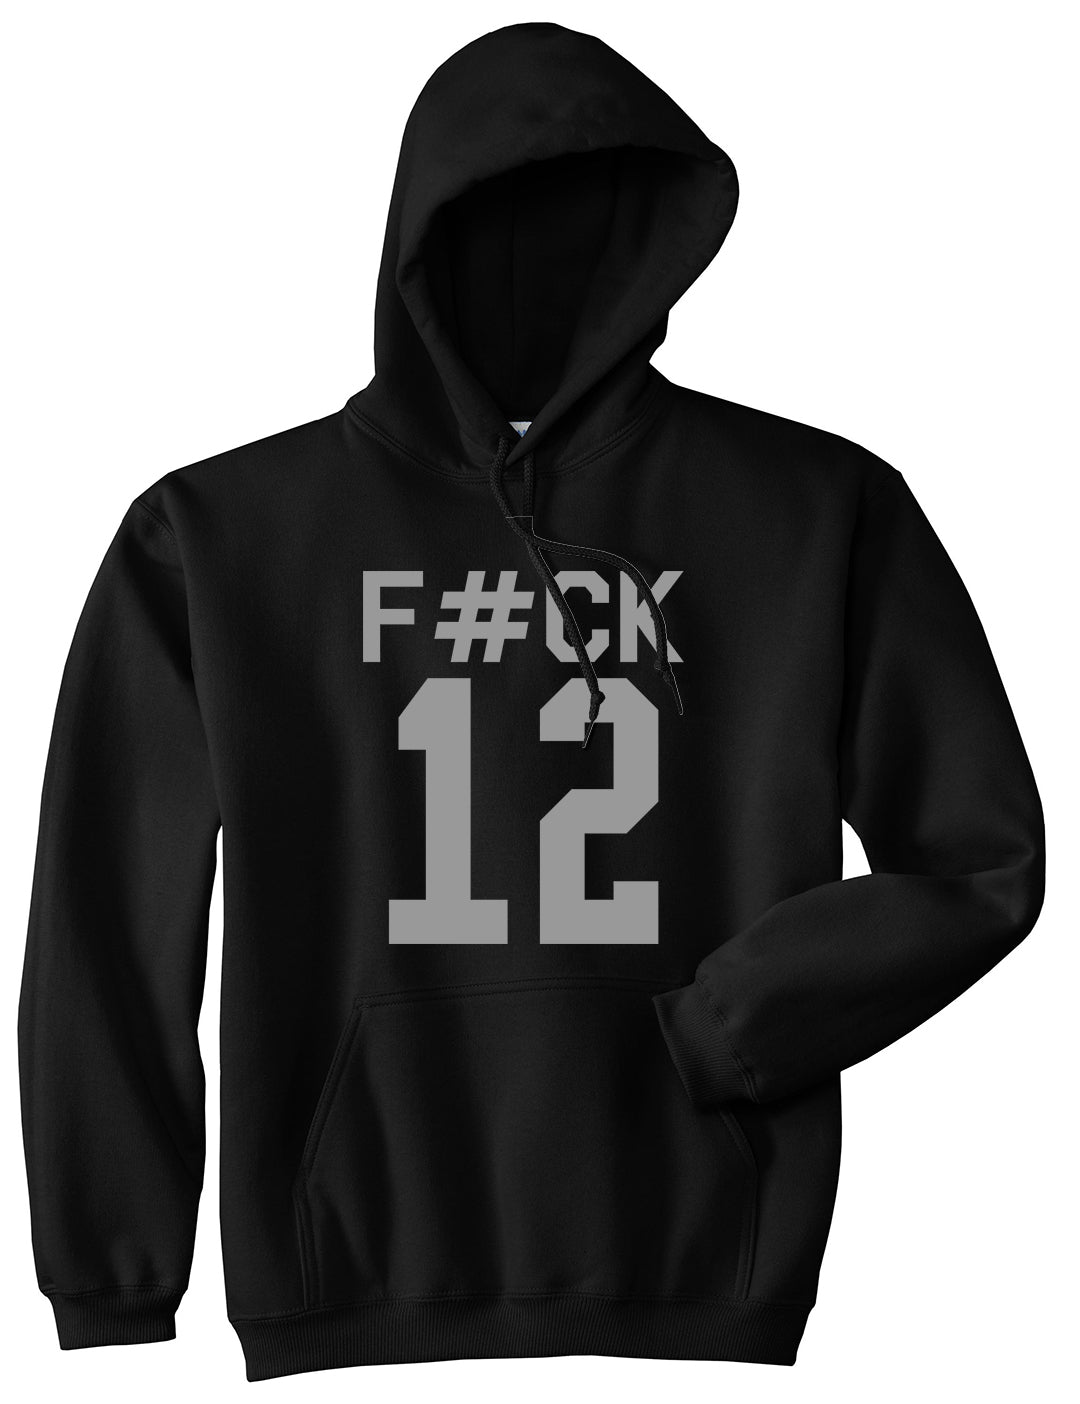 Fck 12 Police Brutality Mens Pullover Hoodie Black by Kings Of NY